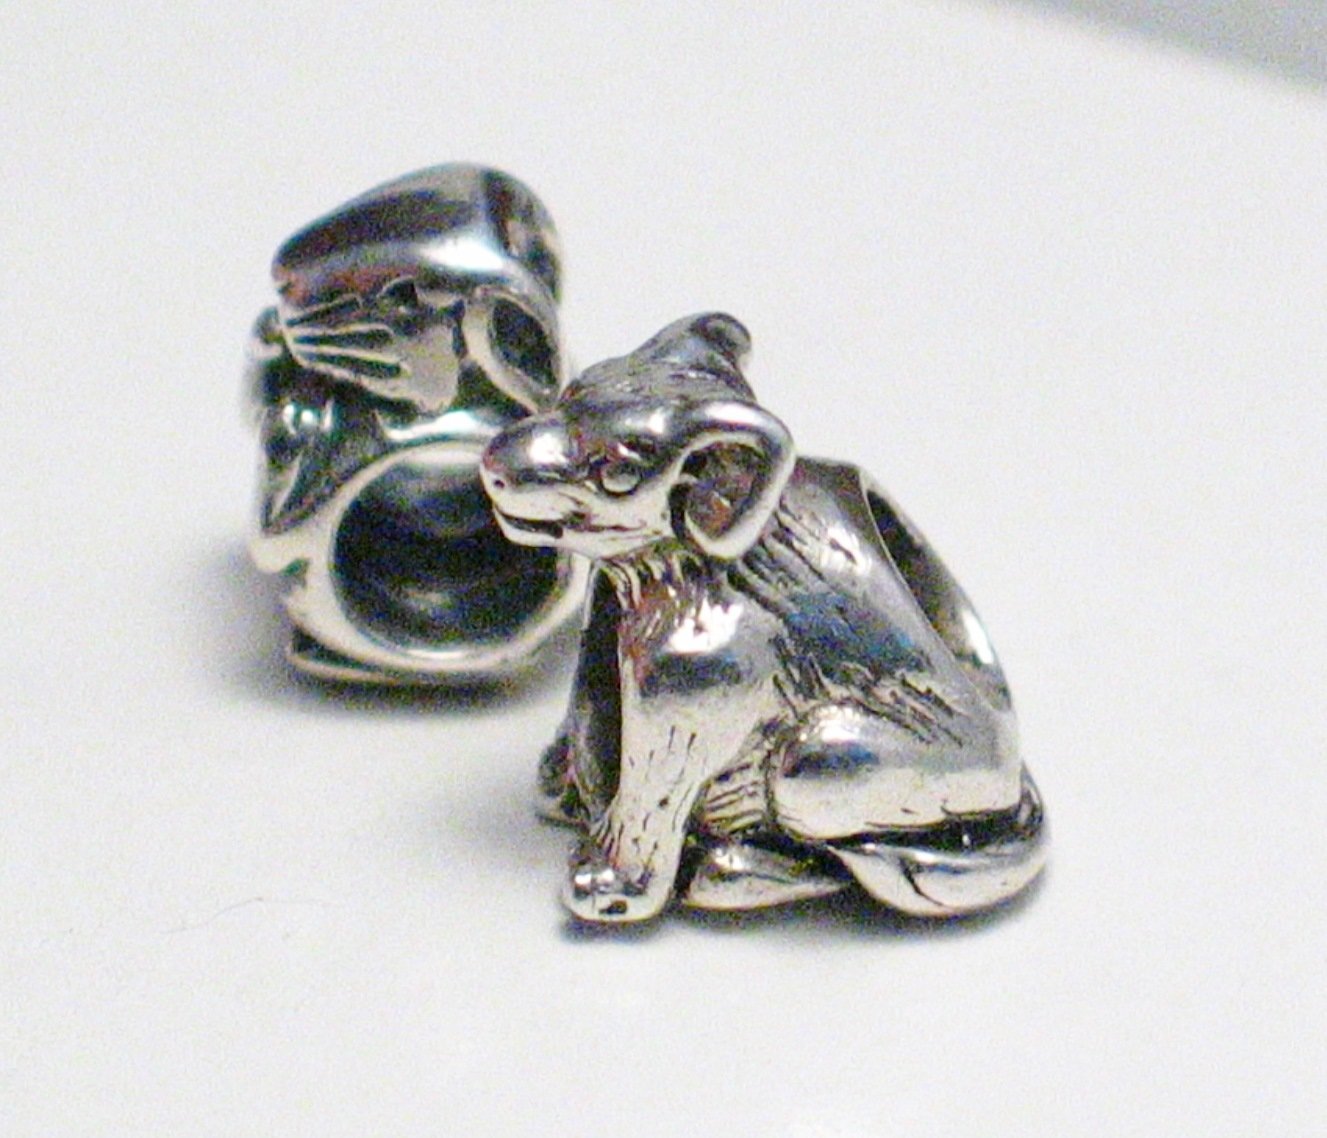 Charm | Sterling Silver Euro Style 3D Dog Rabbit Bead Charms | Estate Jewelry website